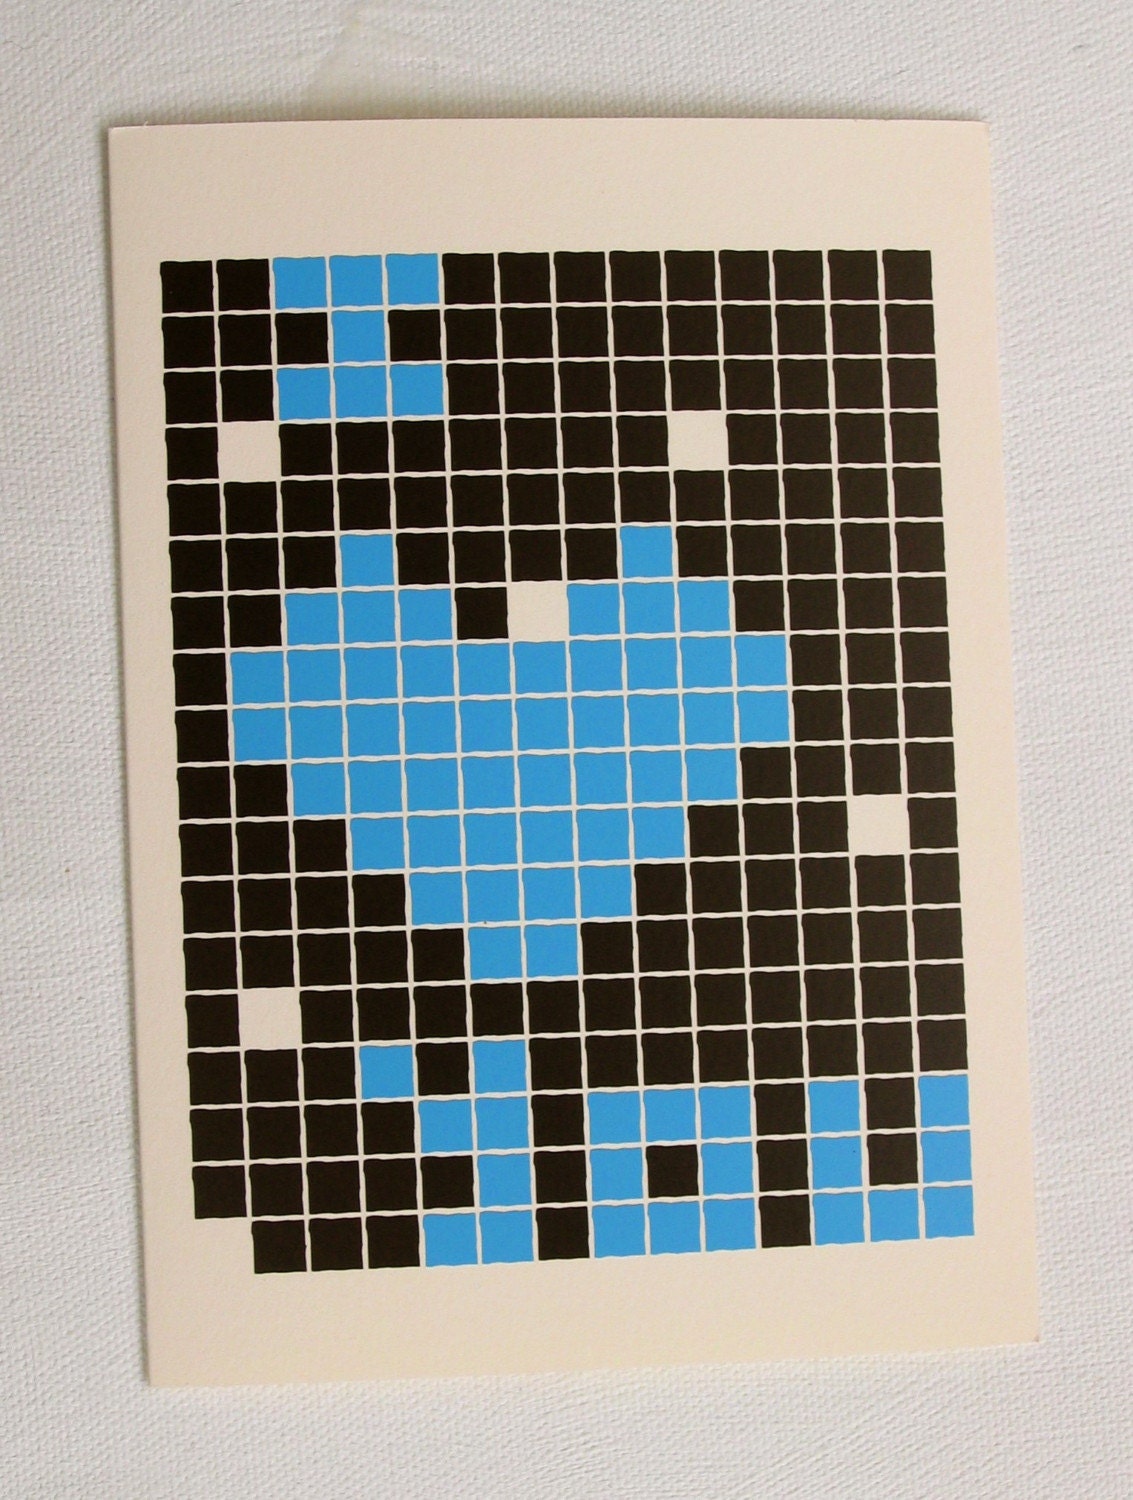 Our 8-bit Love card made it in Nylon Magazine!